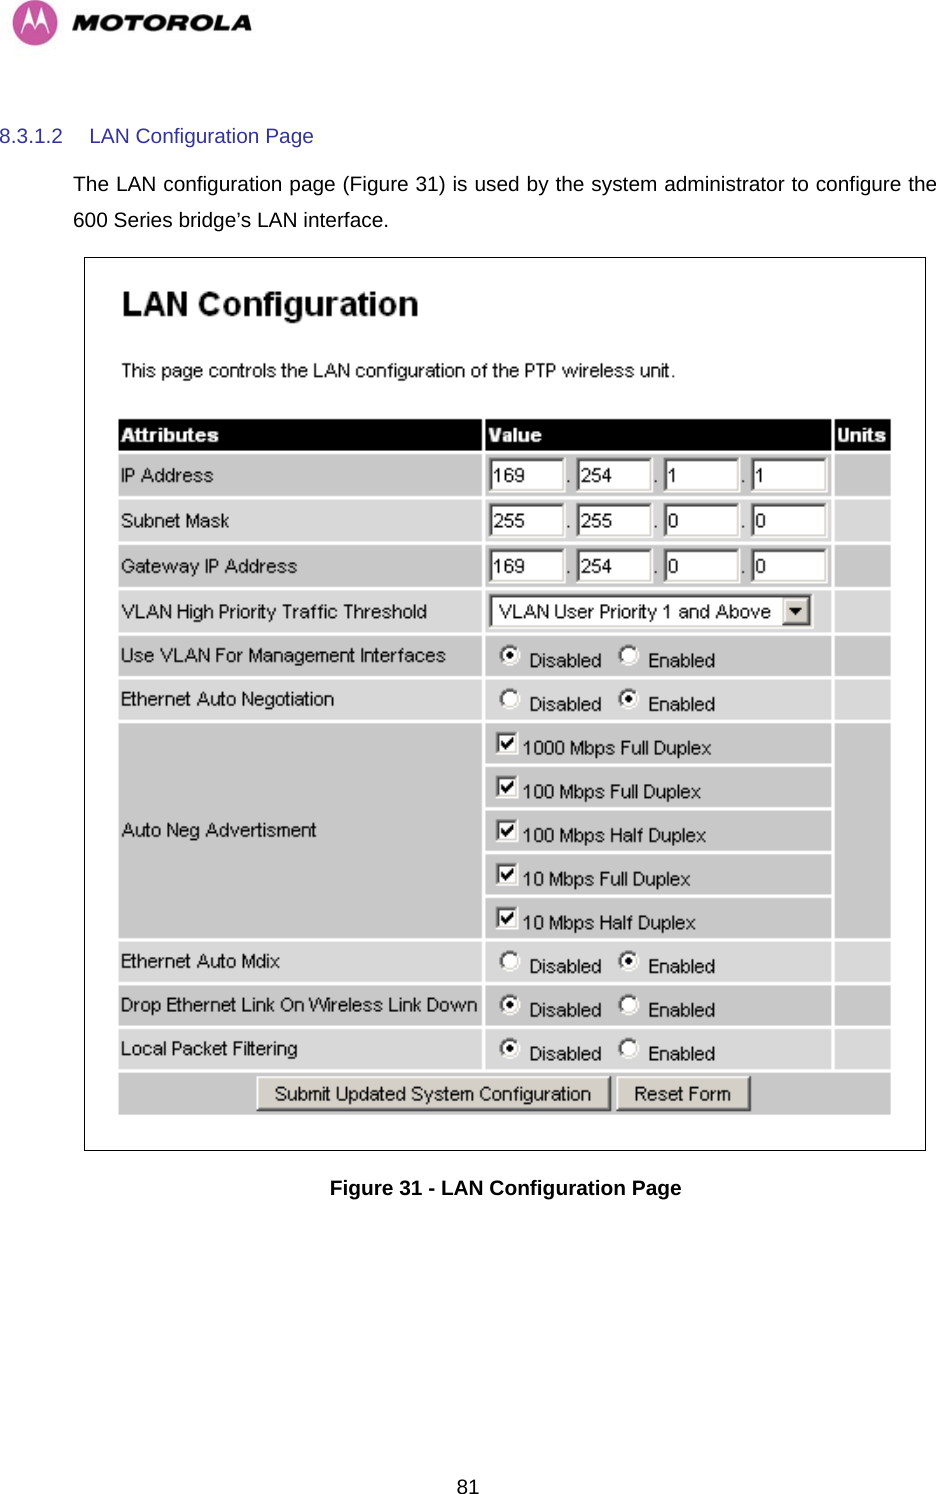   818.3.1.2  LAN Configuration Page The LAN configuration page (Figure 31) is used by the system administrator to configure the 600 Series bridge’s LAN interface.  Figure 31 - LAN Configuration Page 